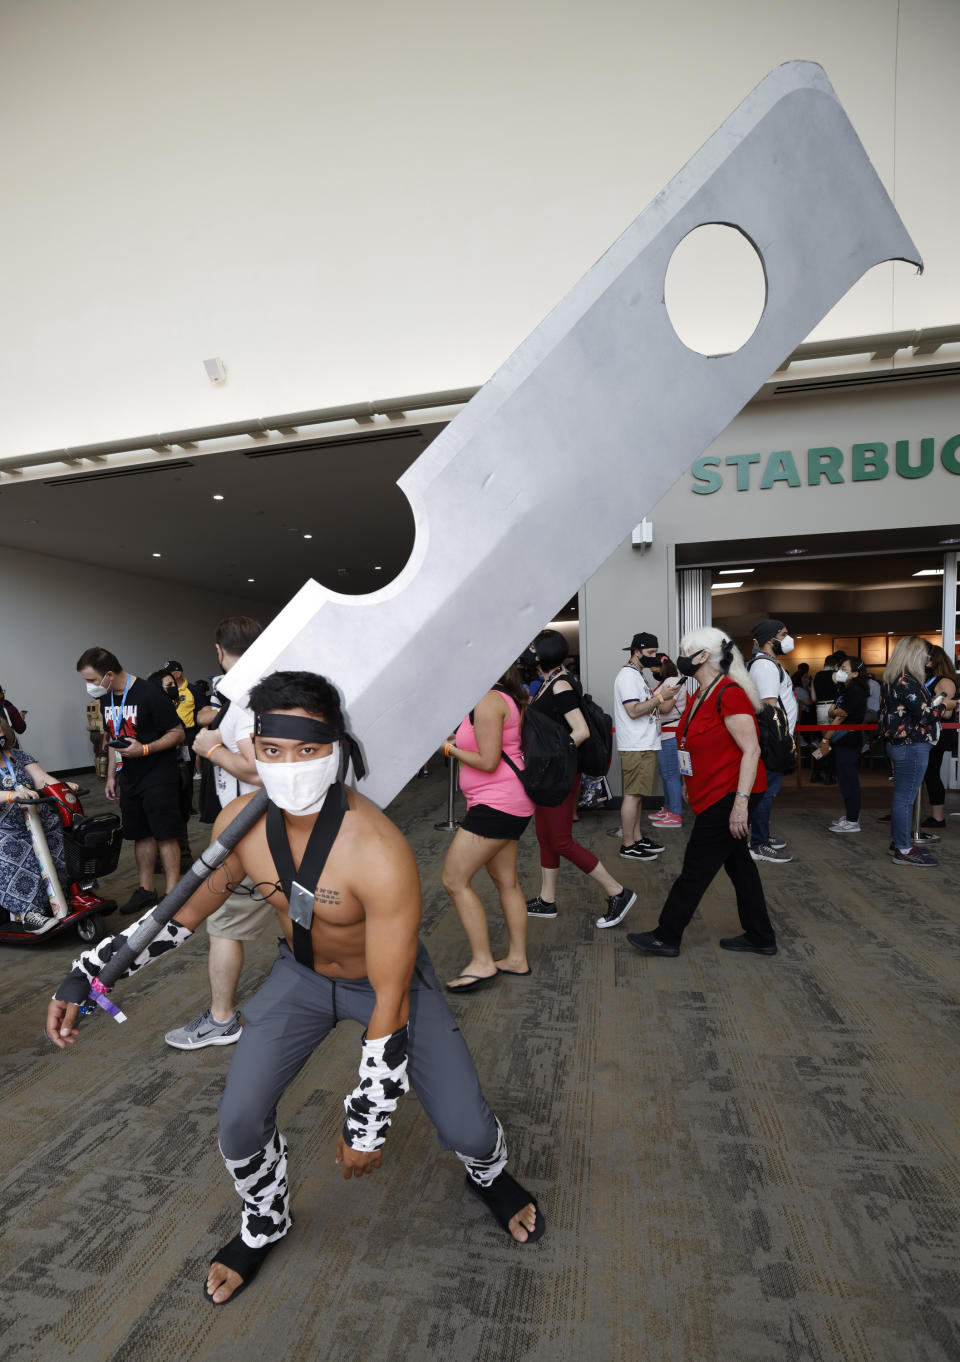 Tristan Moreno, of Santa Clarita, Calif., dressed as Zabuza Momochi from "Naruto" attends day two of Comic-Con International on Friday, July 22, 2022, in San Diego. (Photo by Christy Radecic/Invision/AP)